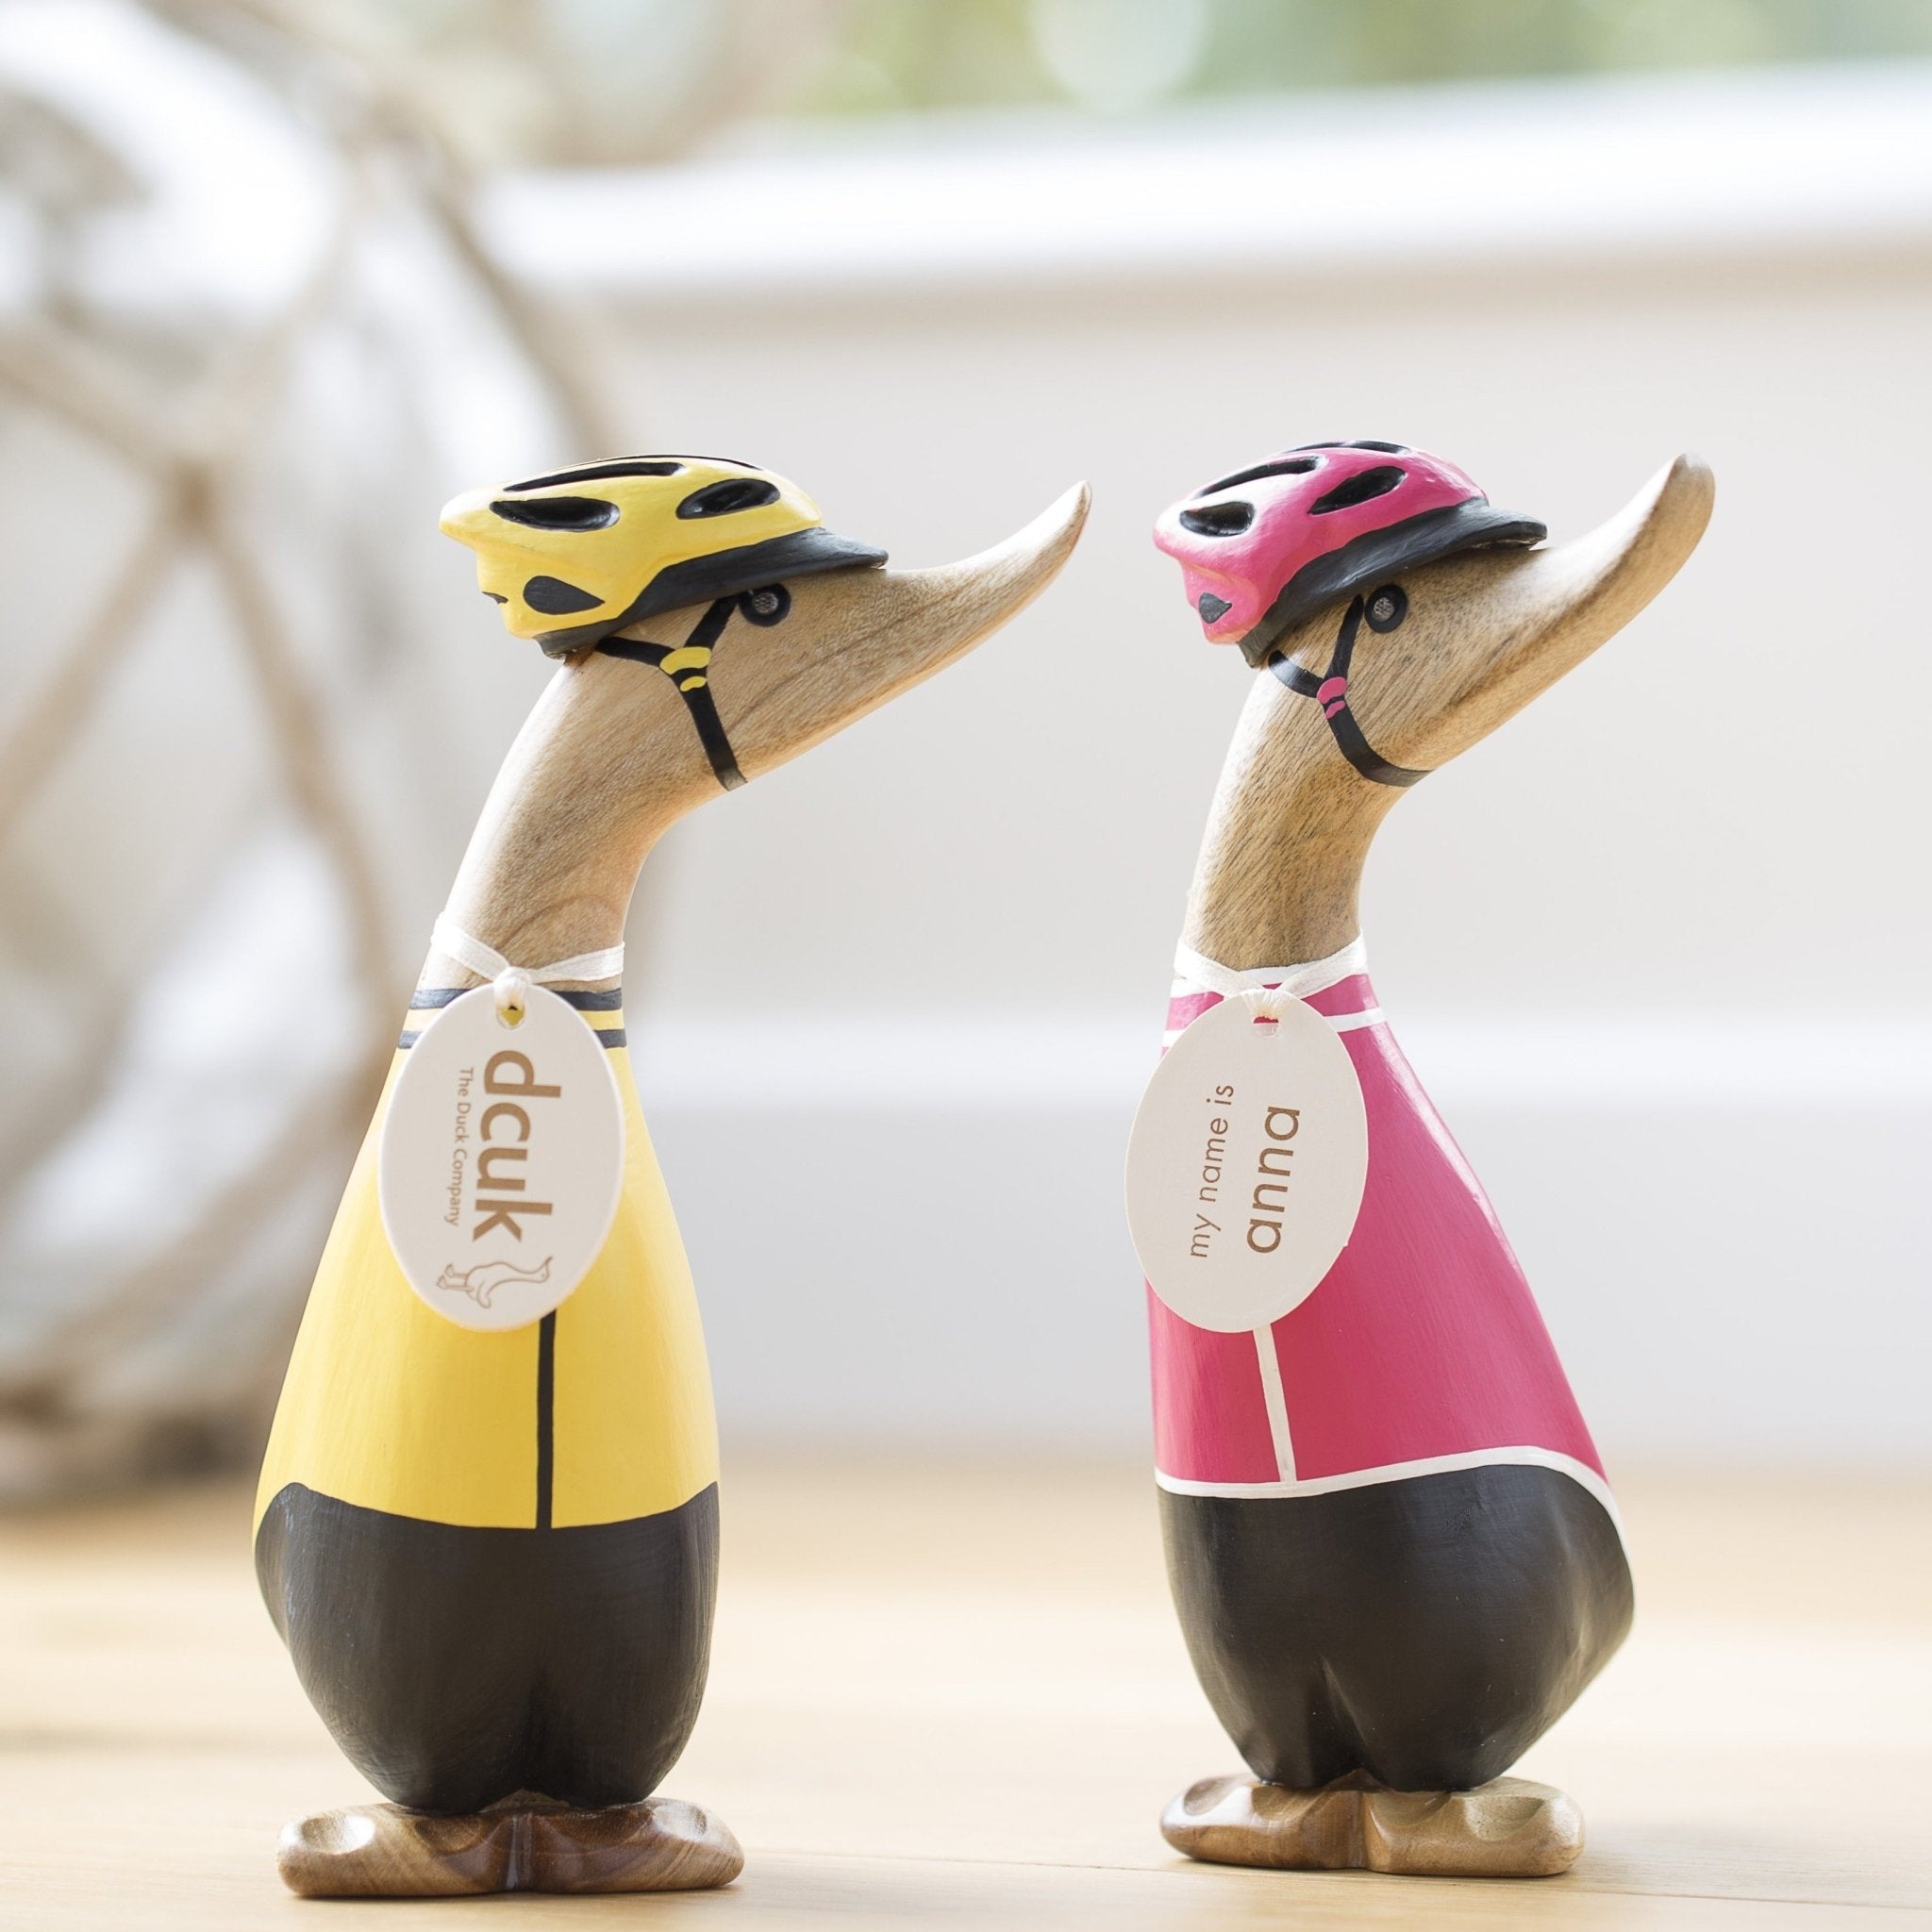 Cyclist Wooden Duckling in Yellow Jersey - Duck Barn Interiors